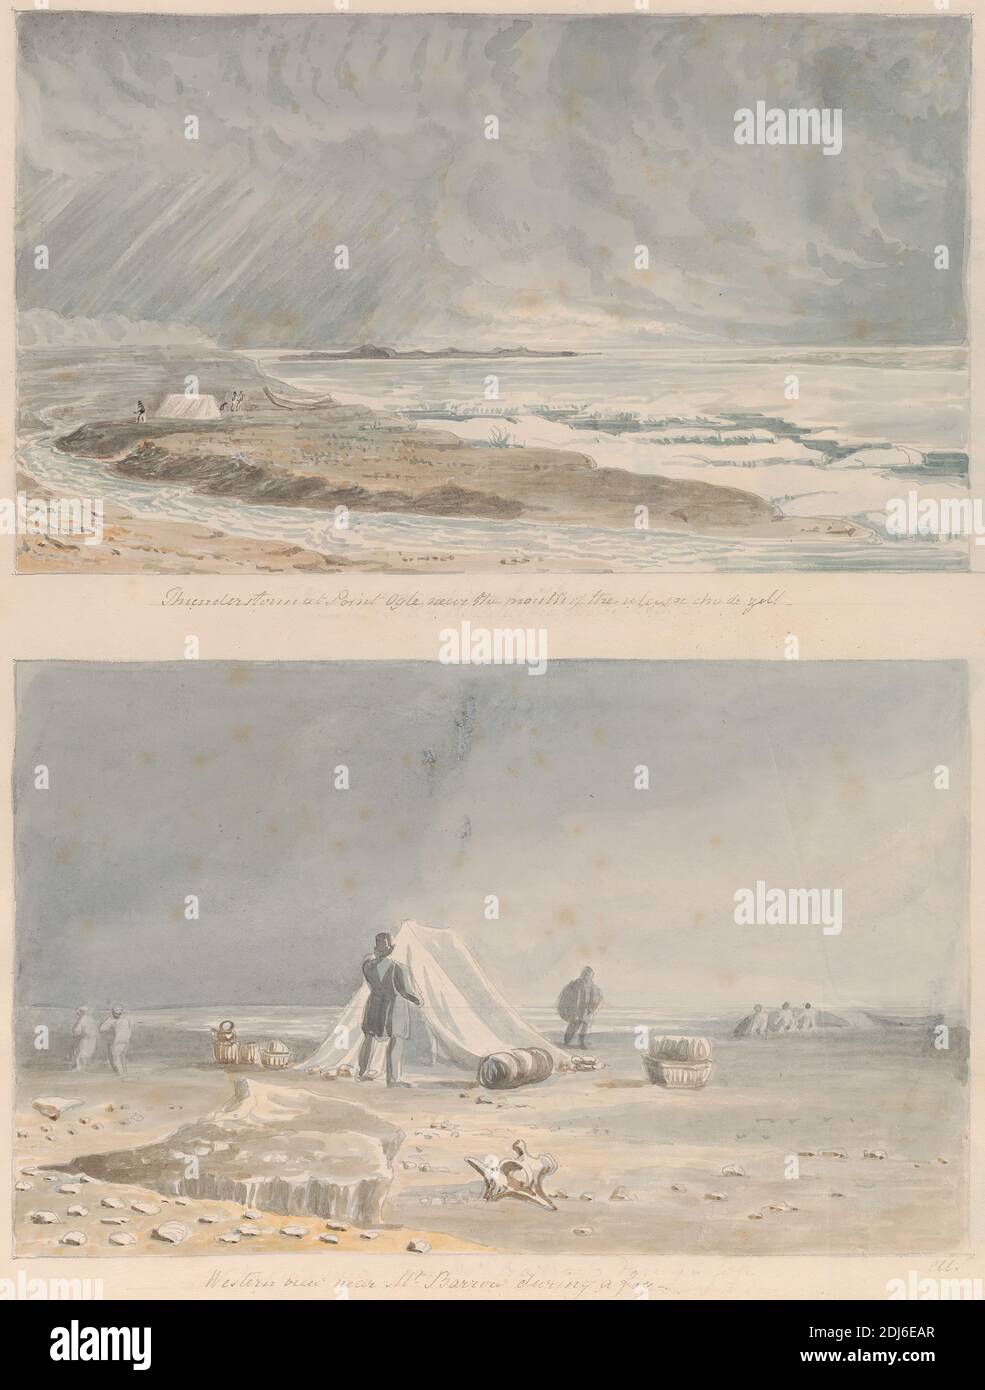 Thunderstorm at Point Ogle near the Mouth of the Thlewechodyeth and Western View near Mount Barrow during a Fog, Charles Hamilton Smith, 1776–1859, Belgian, after Sir George Back F.R.S, 1796—1878, British, undated, Watercolor and graphite on moderately thick, moderately textured, cream wove paper, Sheet: 16 1/8 × 12 7/8 inches (41 × 32.7 cm) and Binding: 16 1/8 inches (41 cm), landscape, marine art Stock Photo